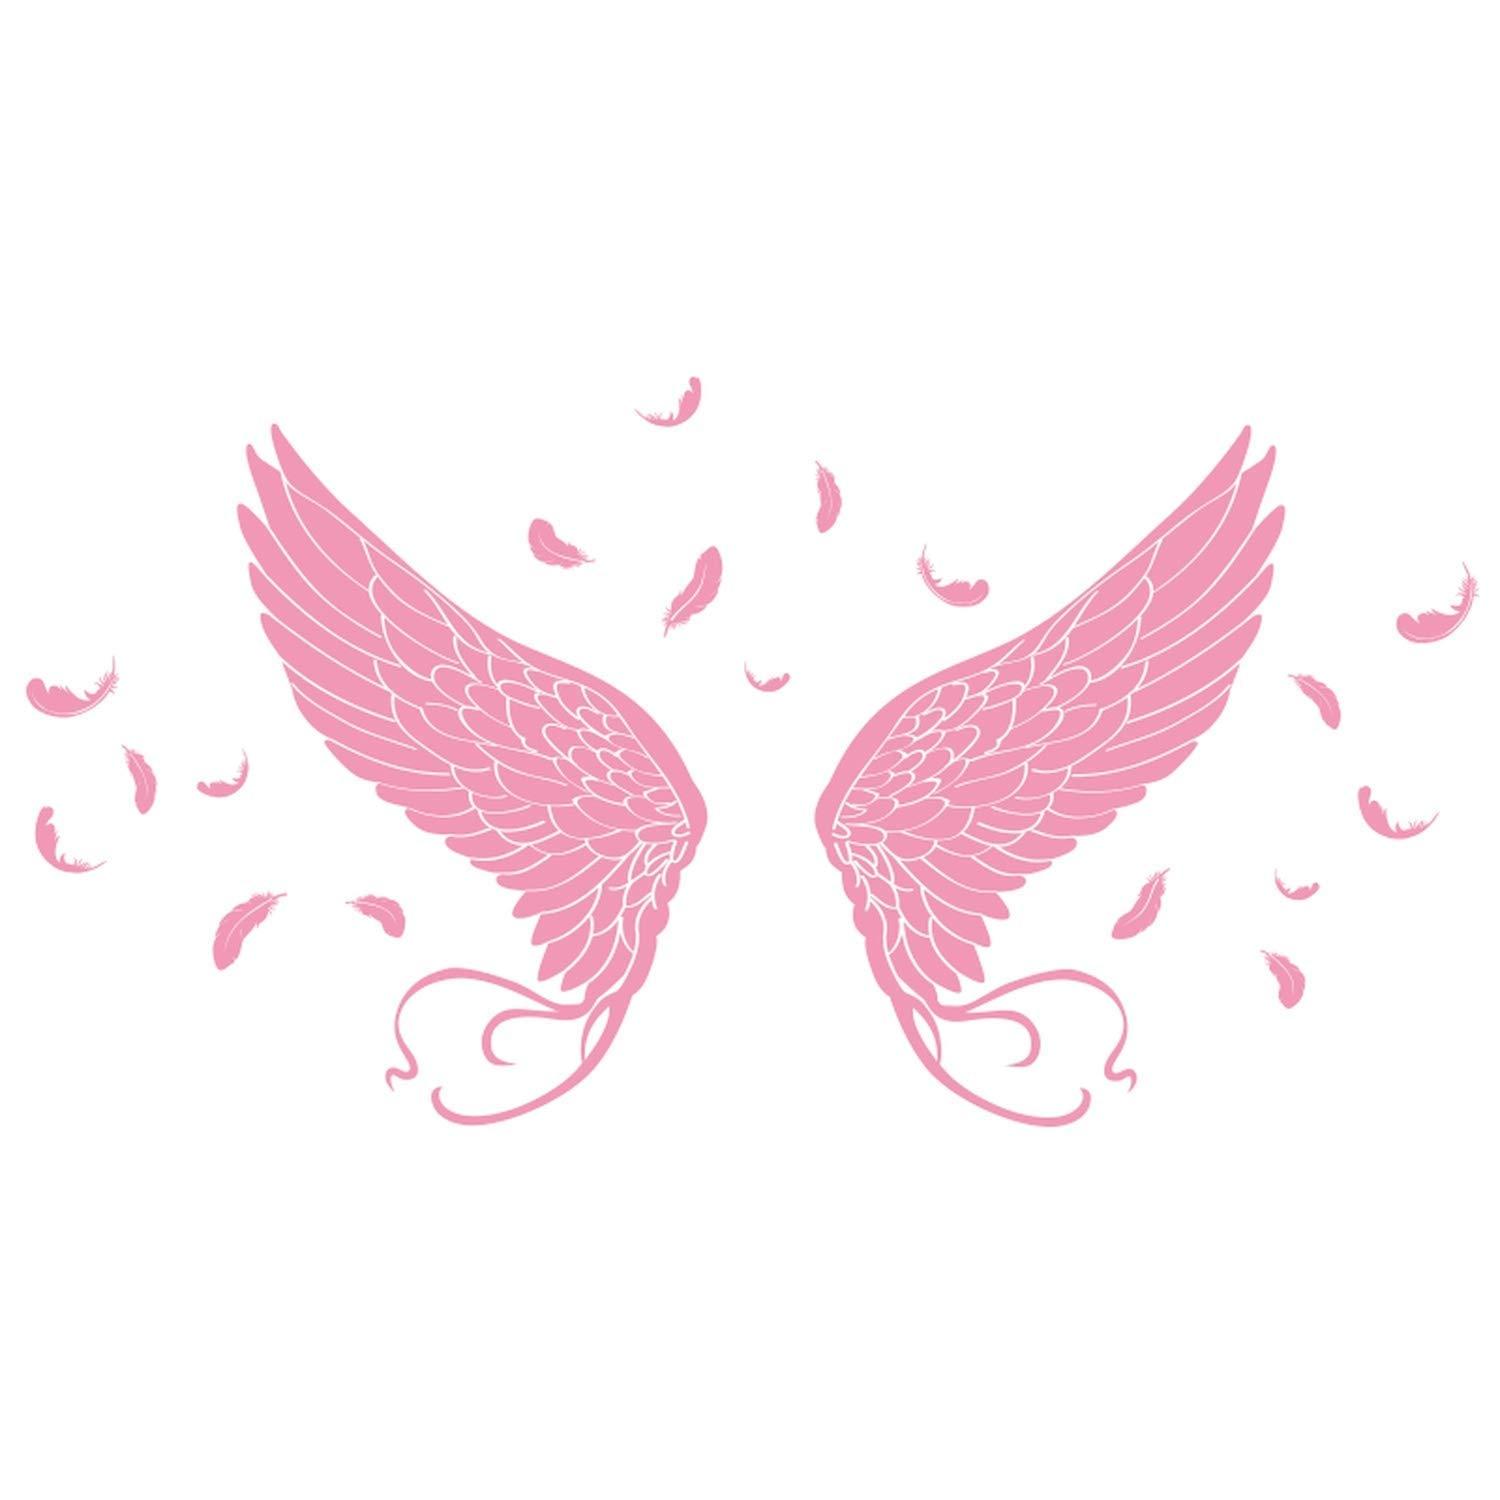 A pair of pink wings with pink feathers flying around them - Wings